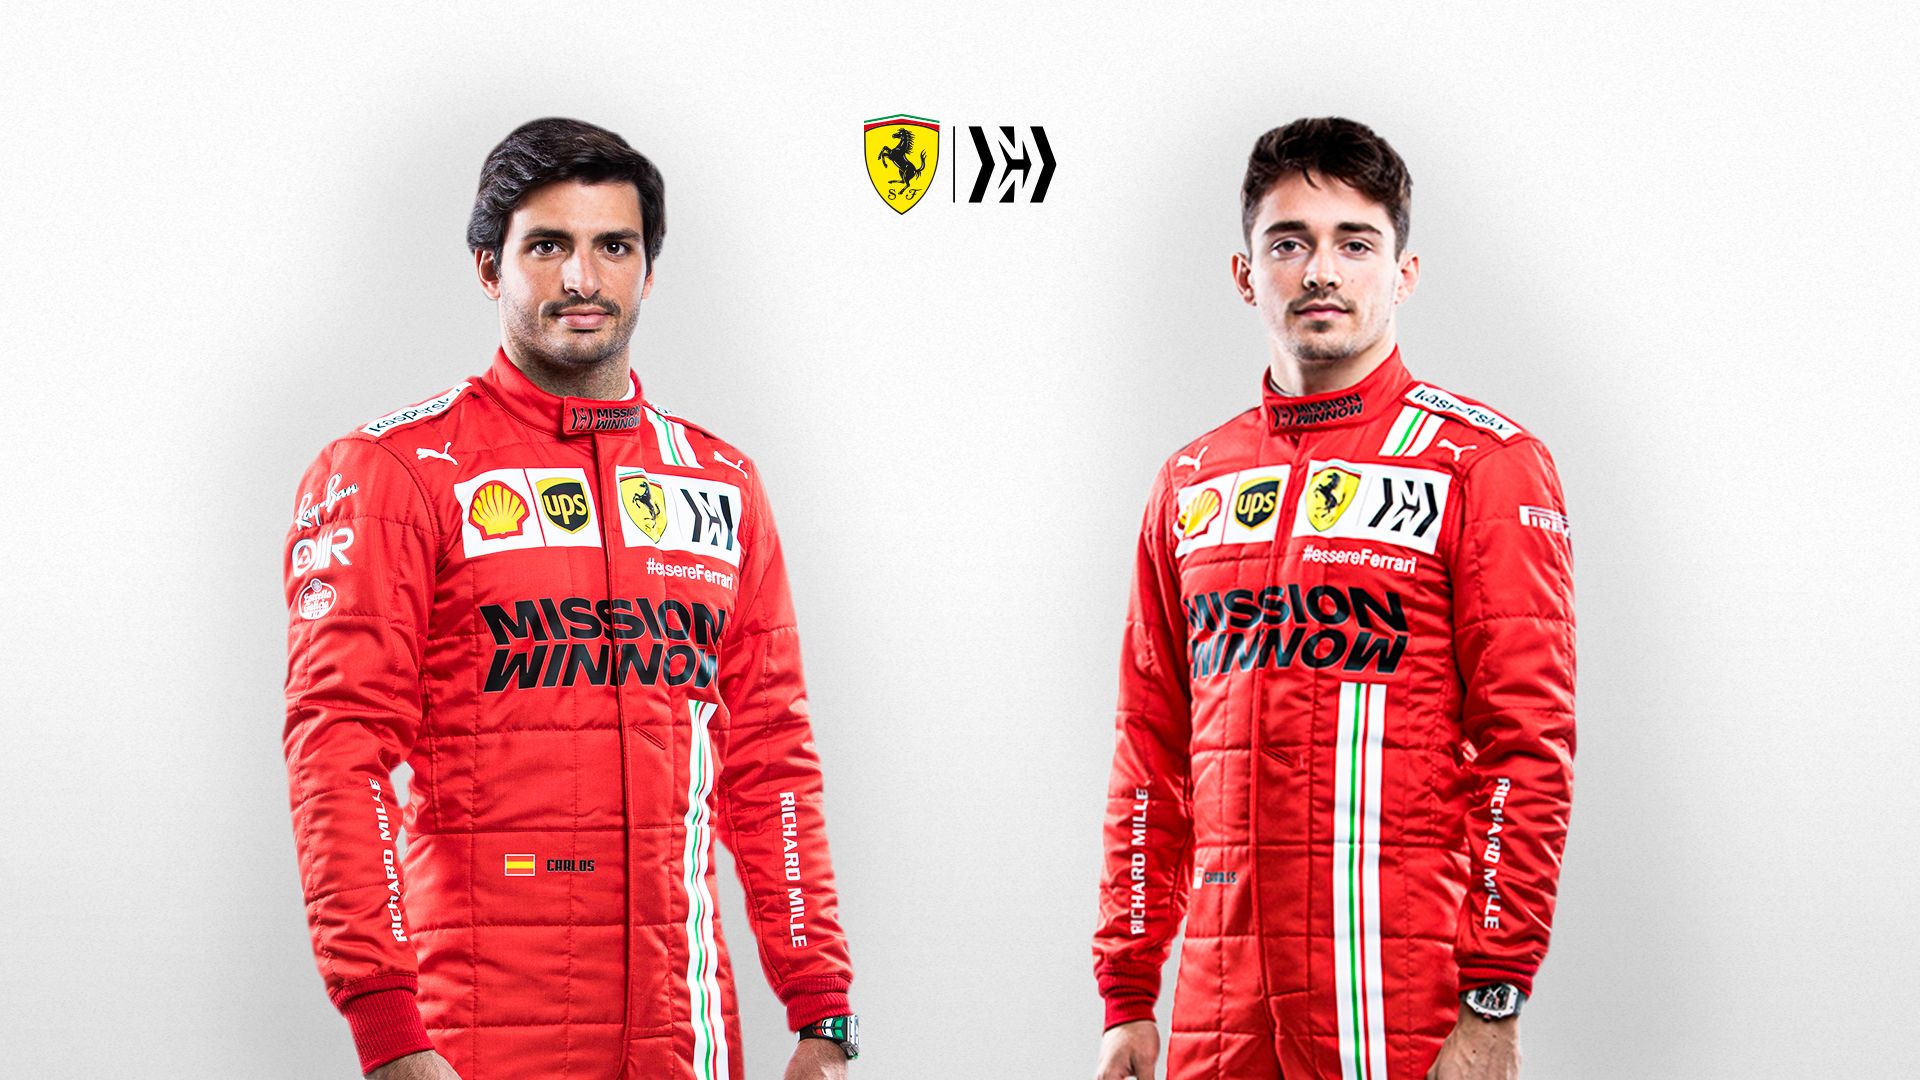 Charles Leclerc and Carlos Sainz reflect on possibility of racing for Ferrari at Le Mans